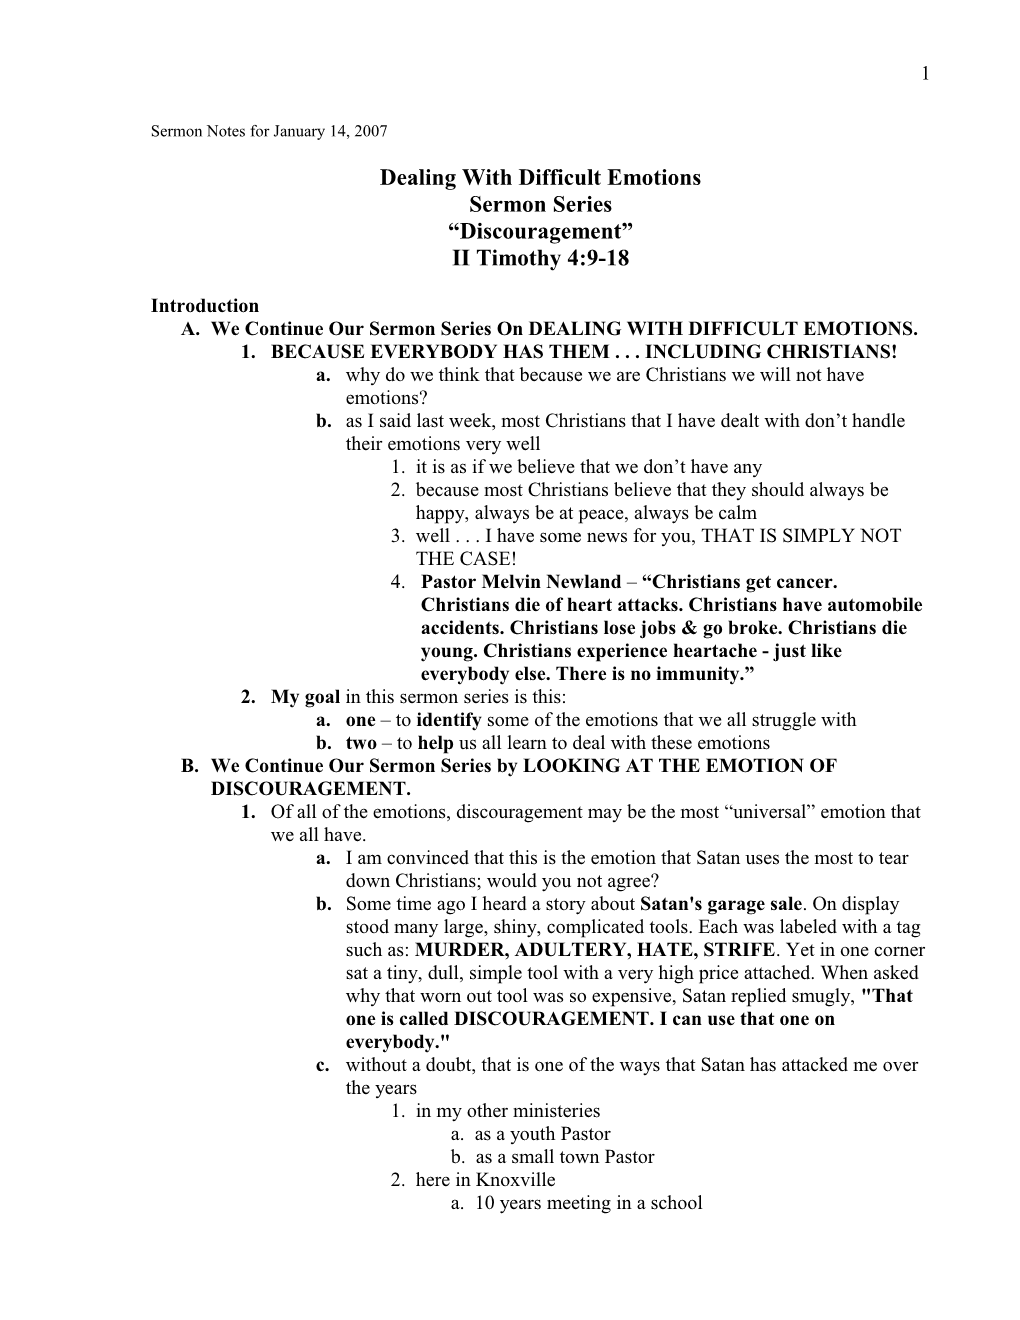 Sermon Notes for January 14, 2007